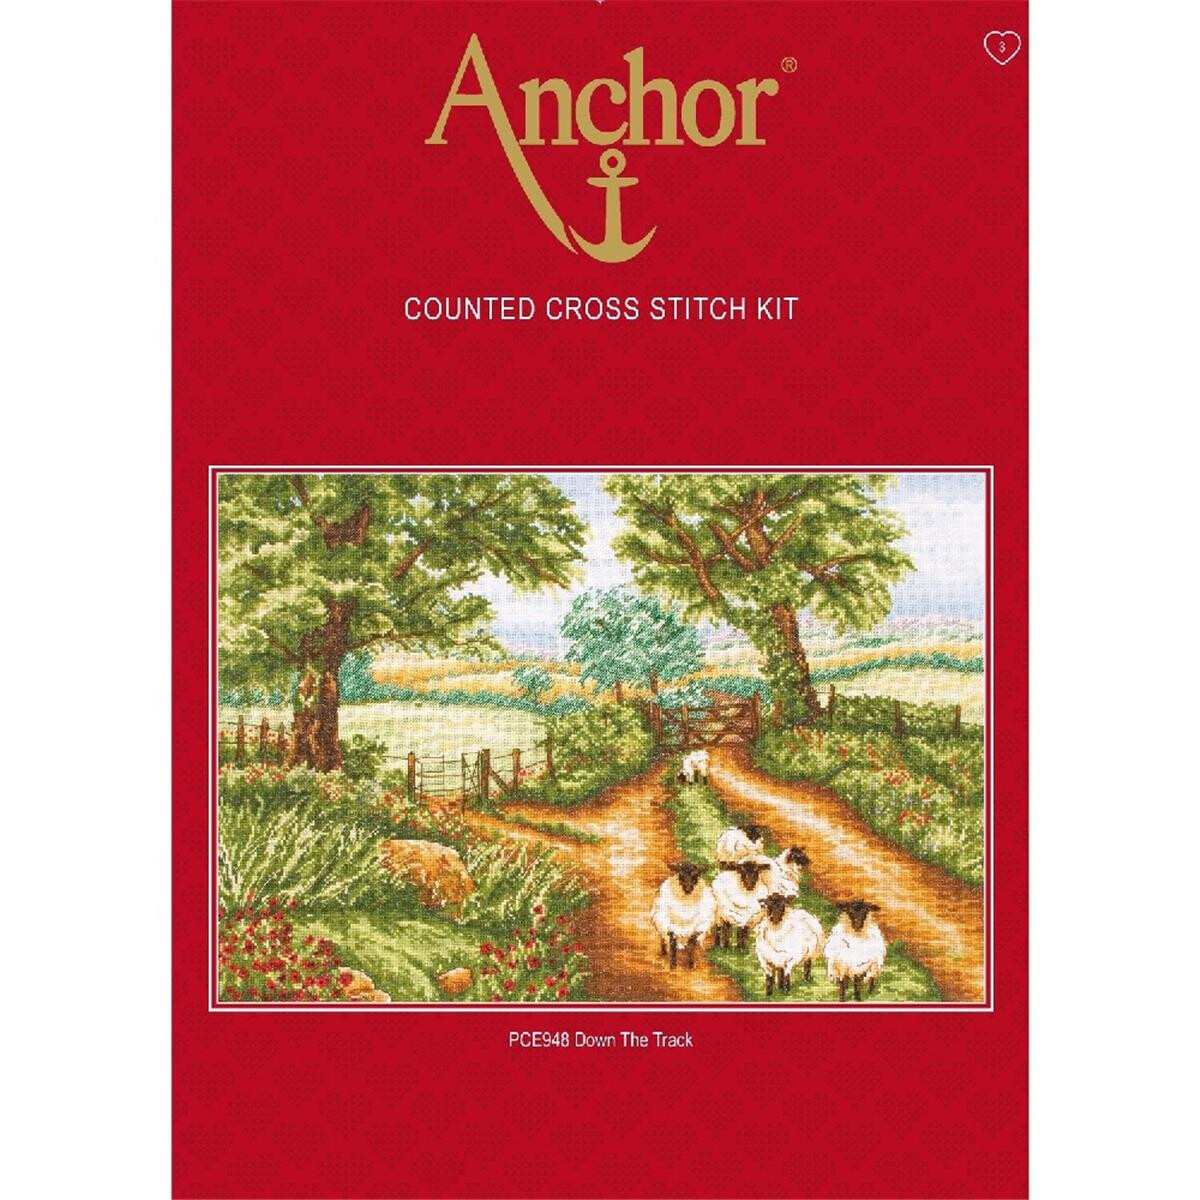 Anchor counted Cross Stitch kit "Down The...